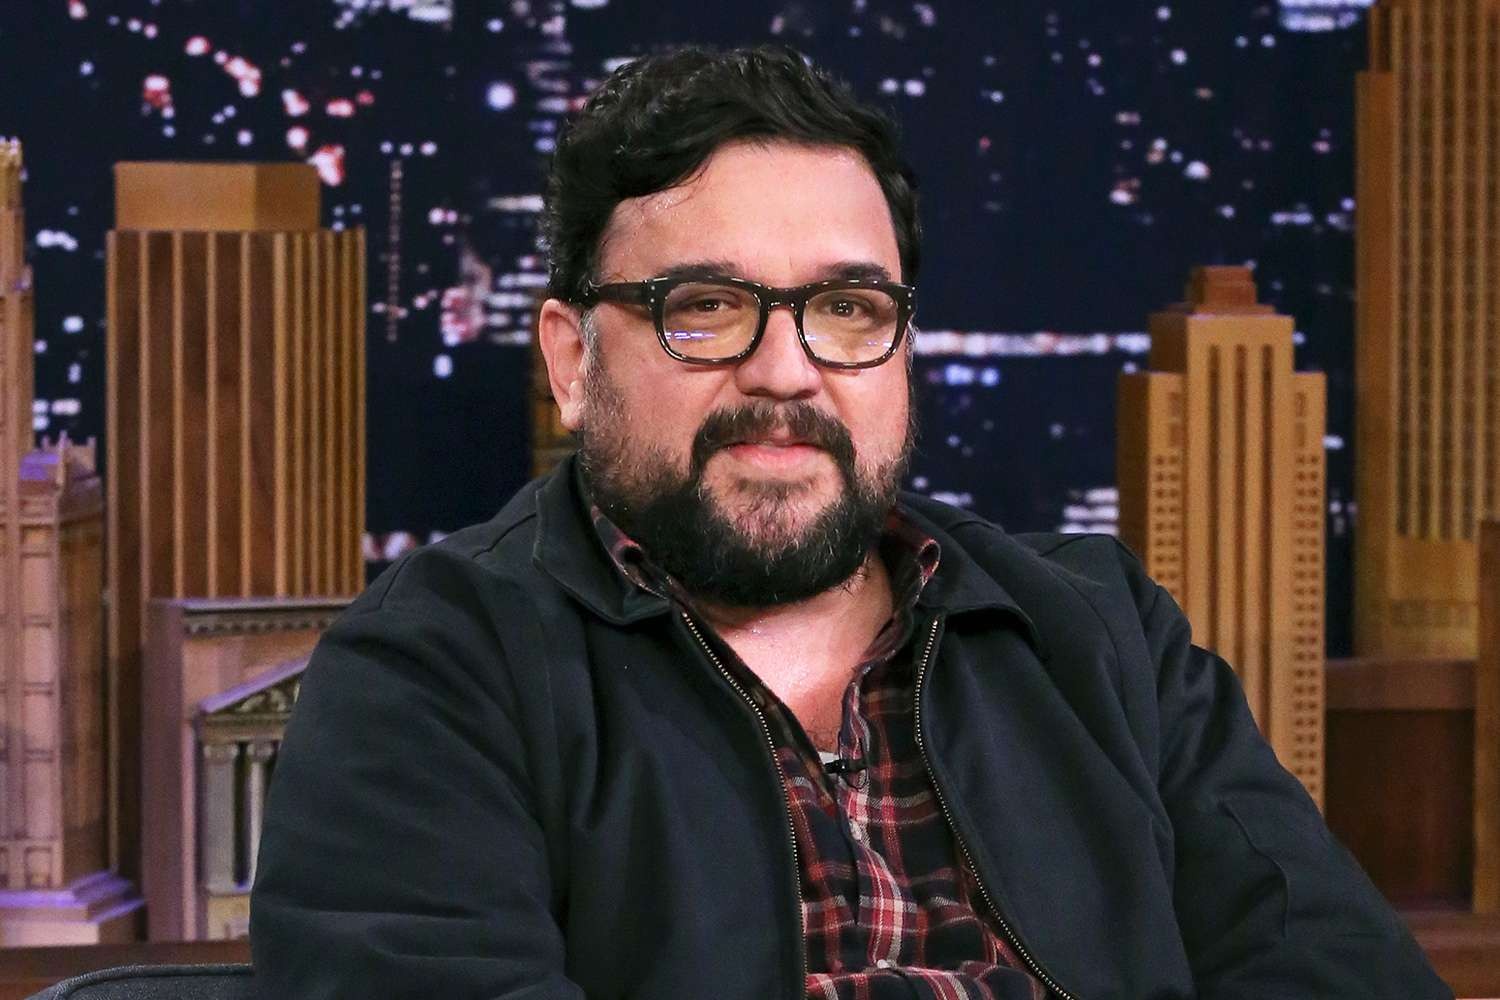 21-captivating-facts-about-horatio-sanz